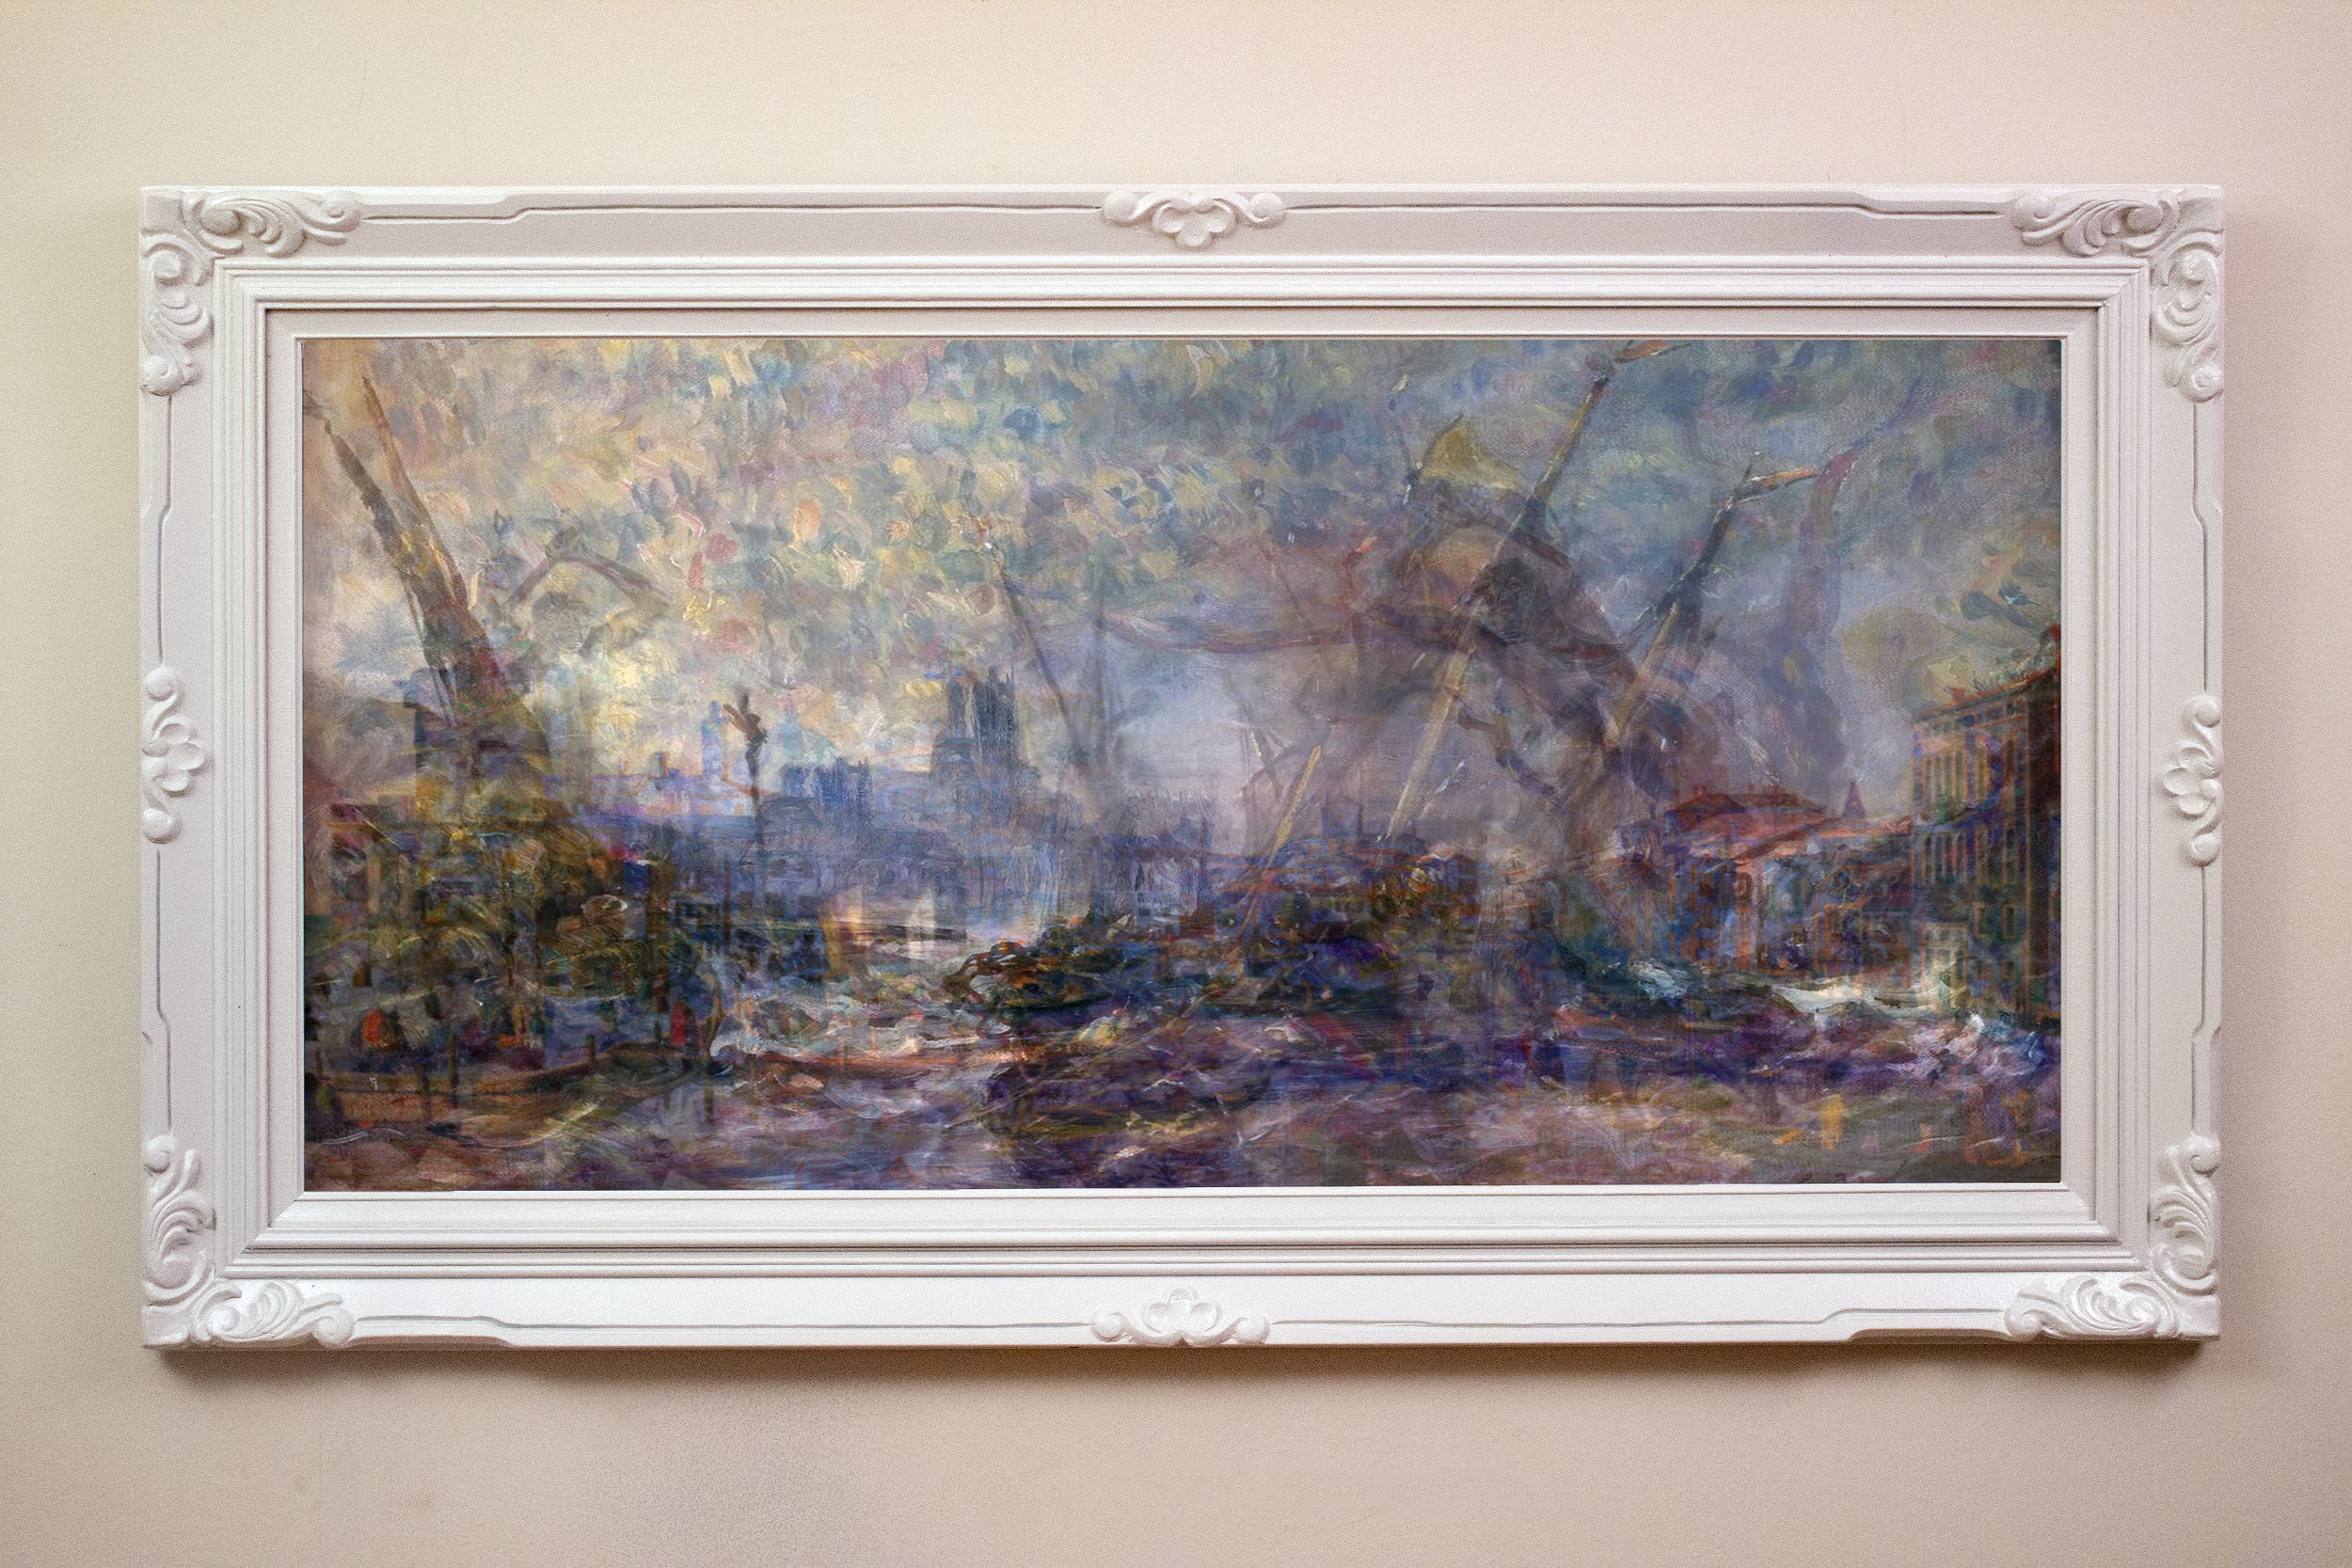   The Sinking of Venice , 2015.  Pigment Print on Luster Paper  60 in. x 33 in. (includes frame) 